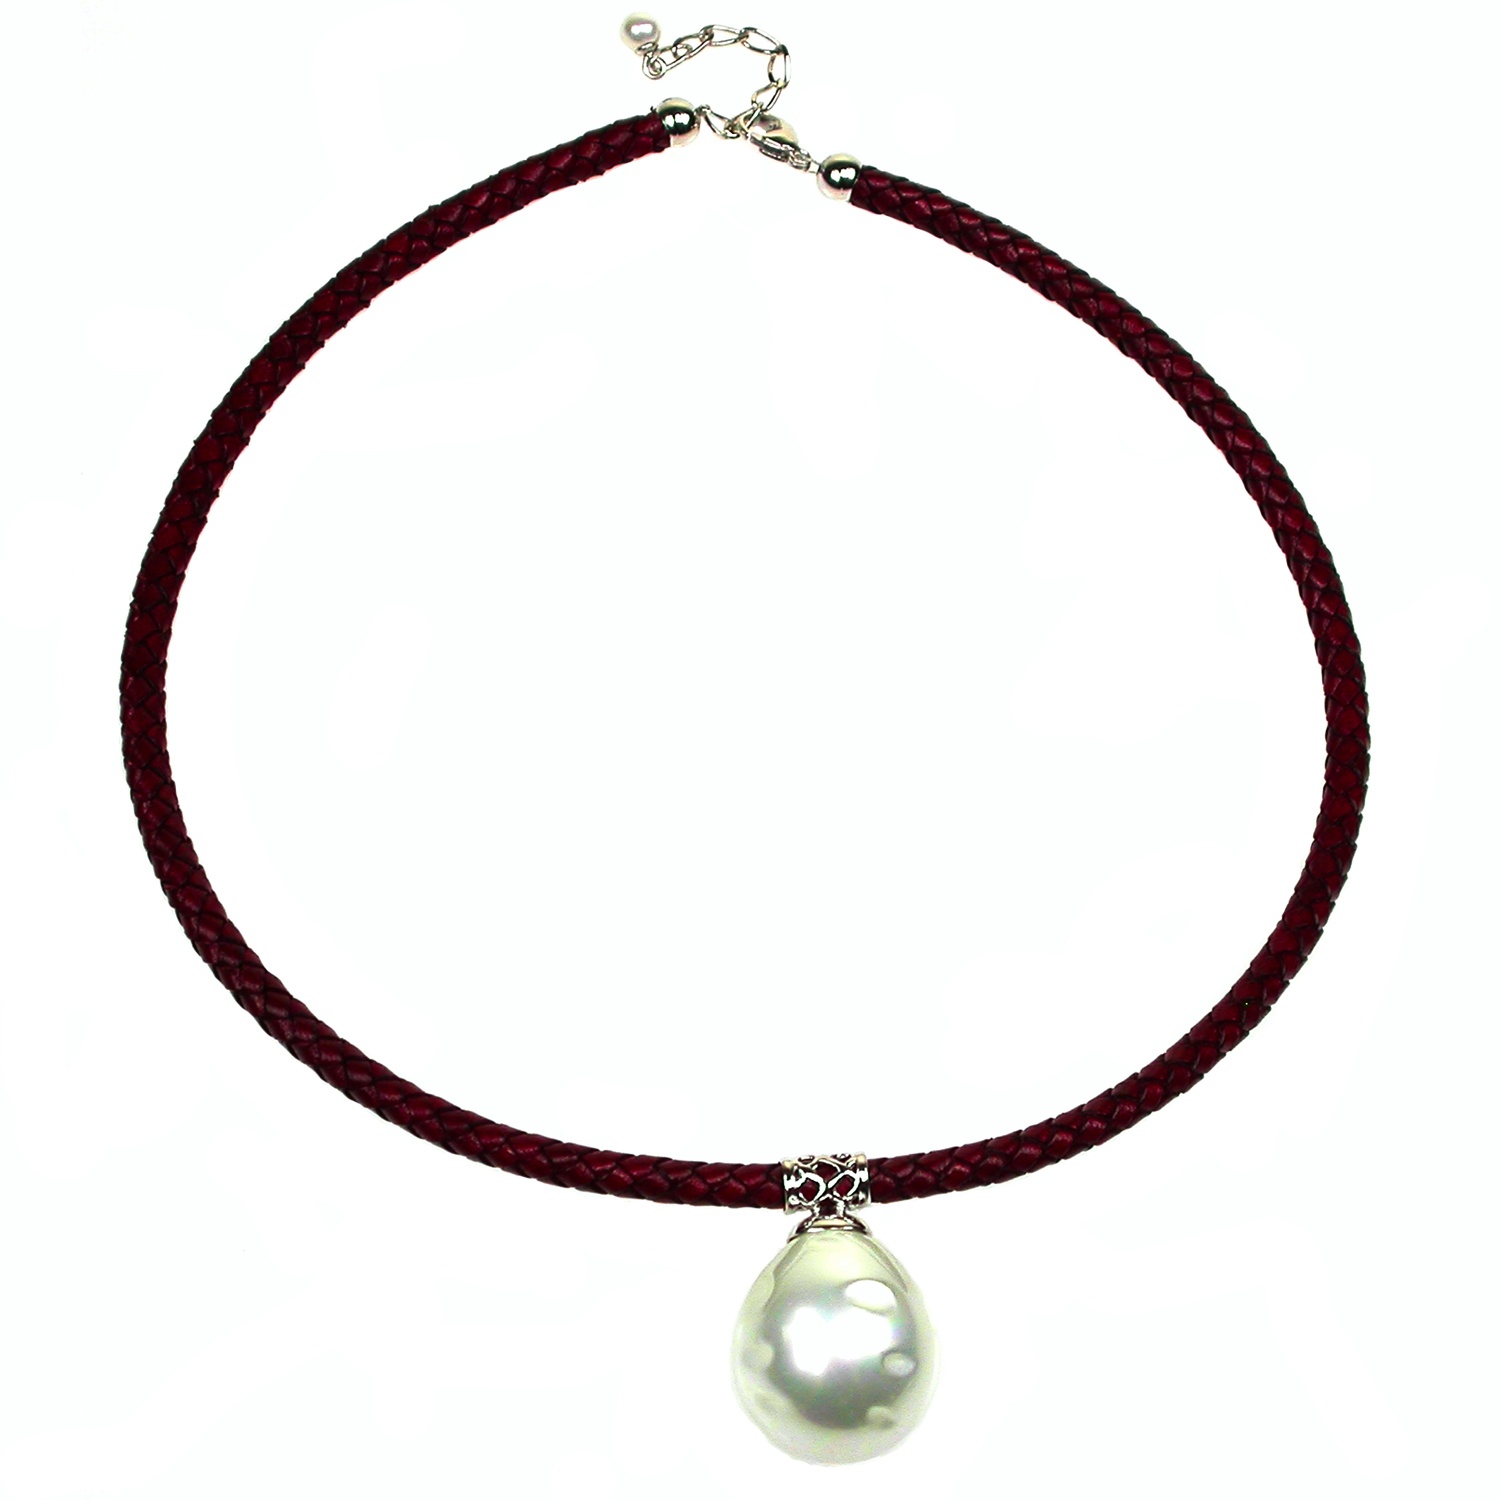 Burgandy leather Necklace 1